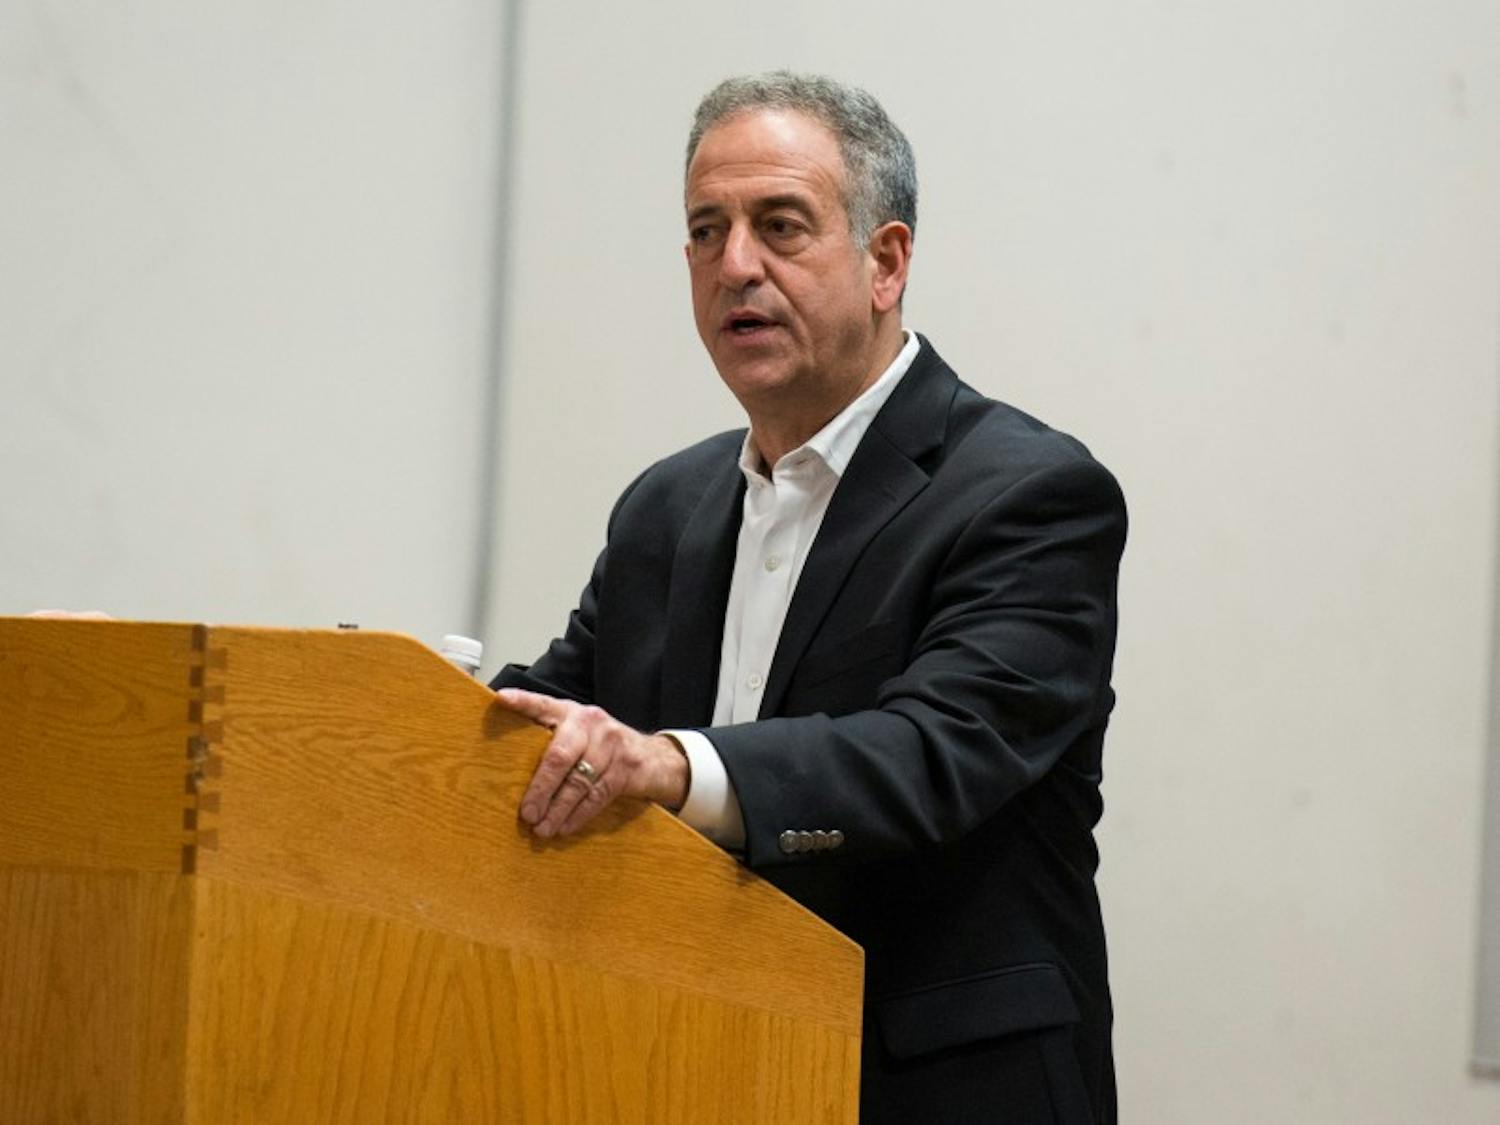 Democrat Russ Feingold has a 6-point lead over Republican incumbent Ron Johnson in Wednesday’s Marquette University Law School poll.